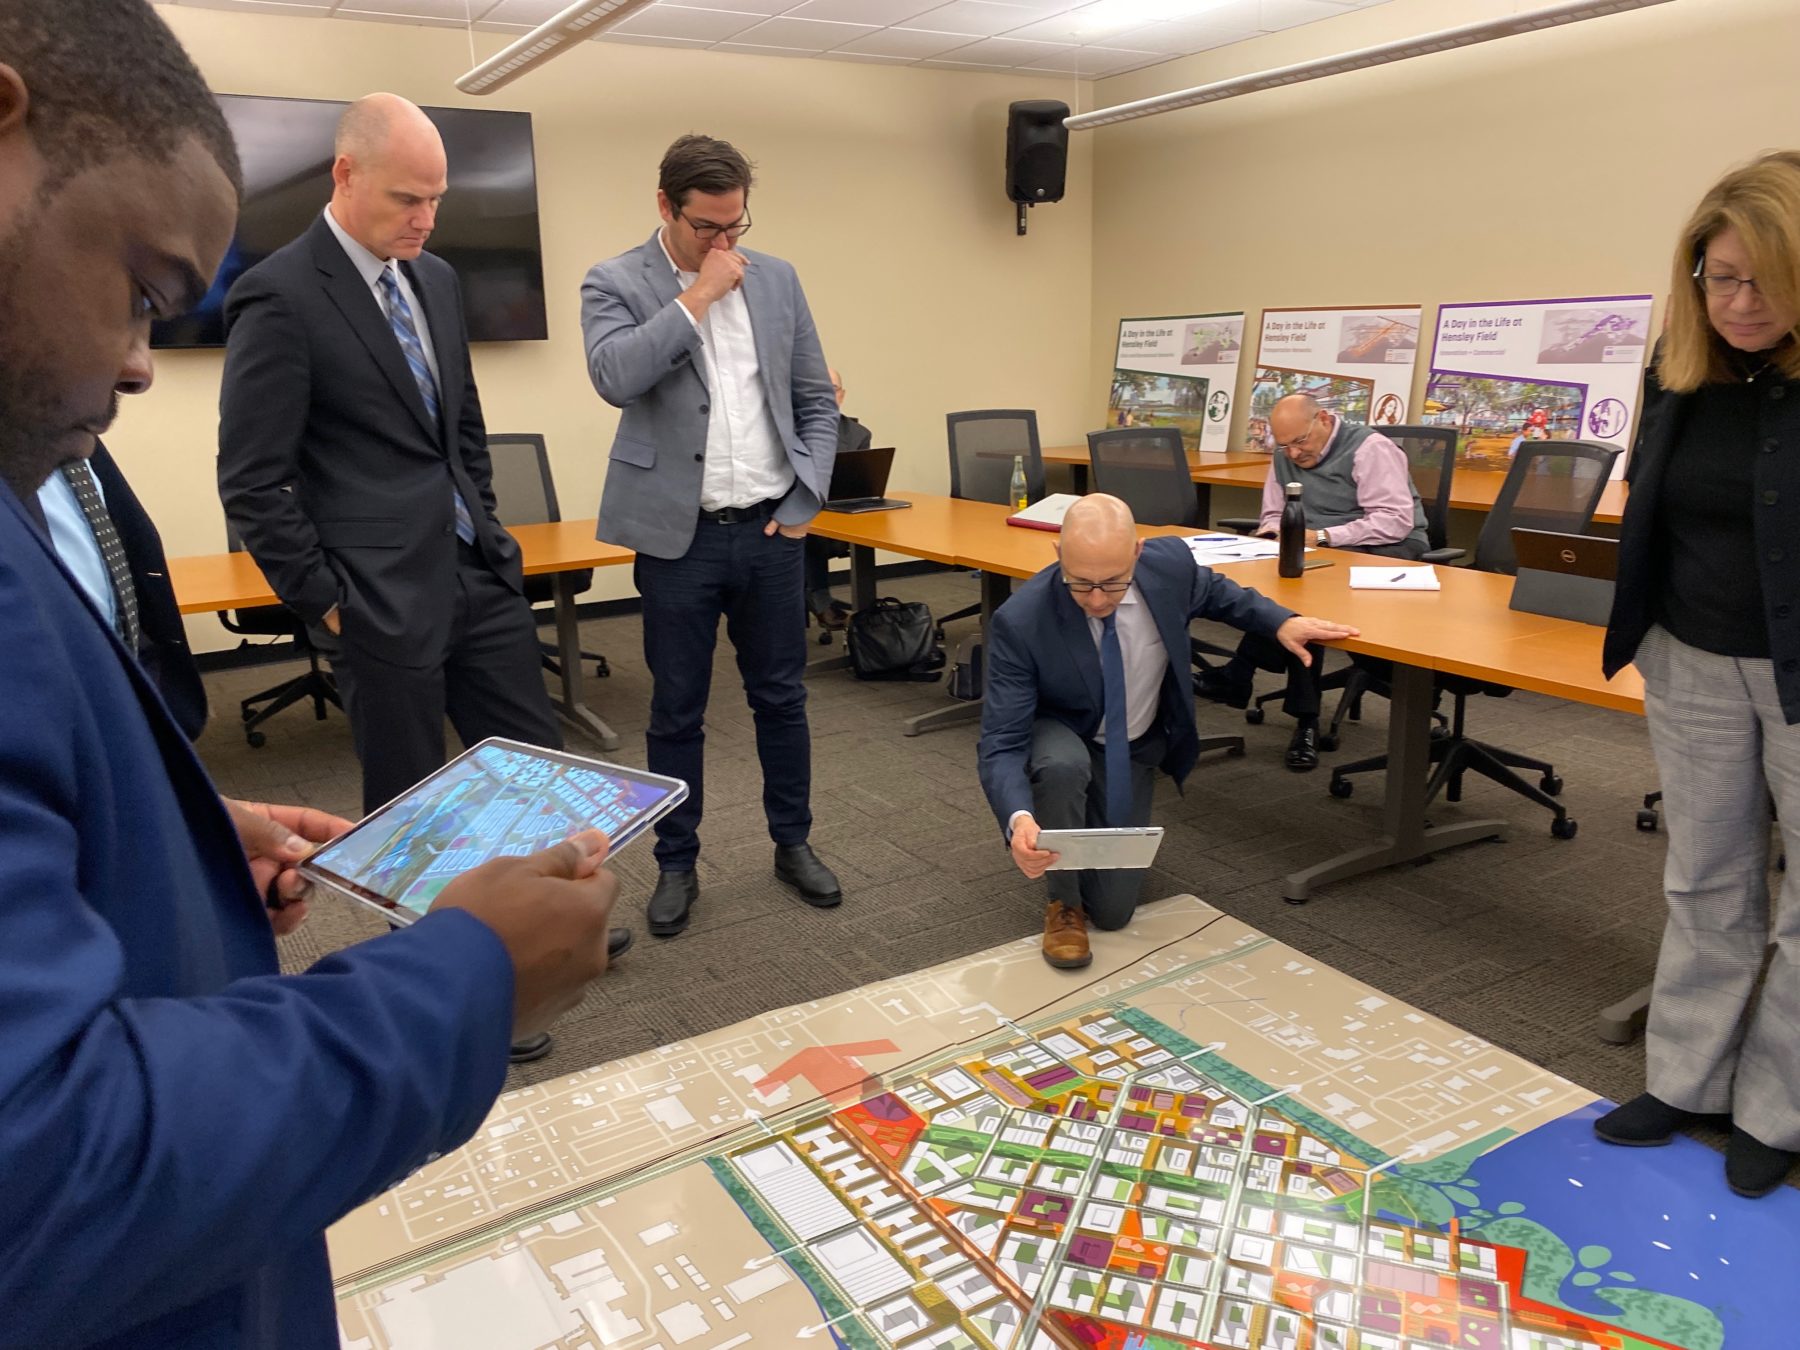 a group gathers around a large map placed on the floor. One participant looks at 3D content on a tablet device.